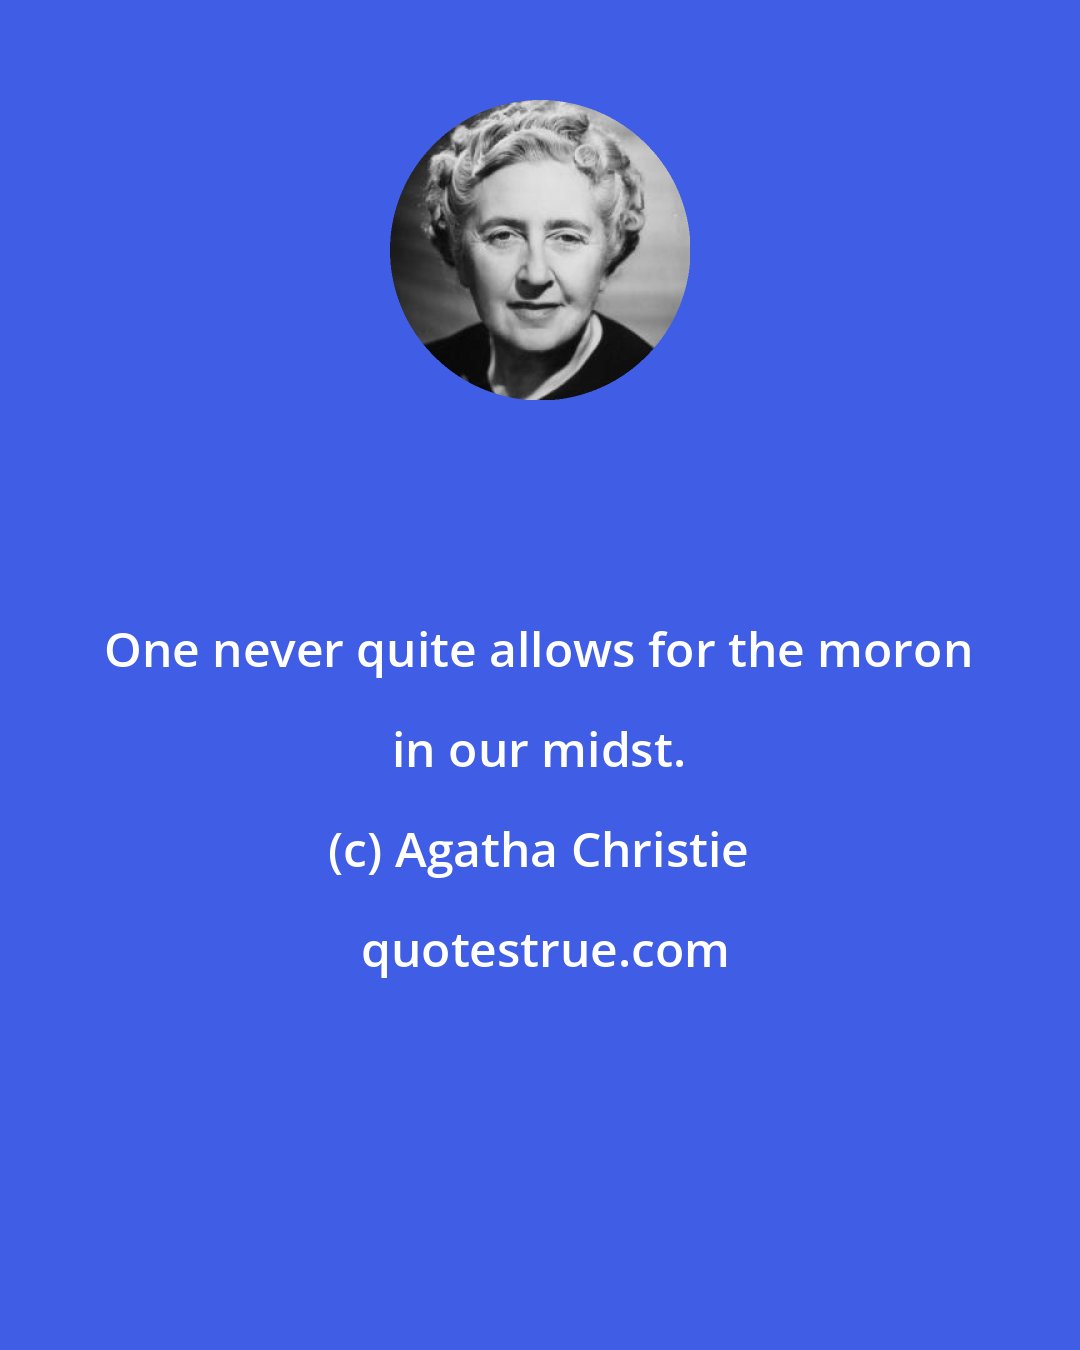 Agatha Christie: One never quite allows for the moron in our midst.